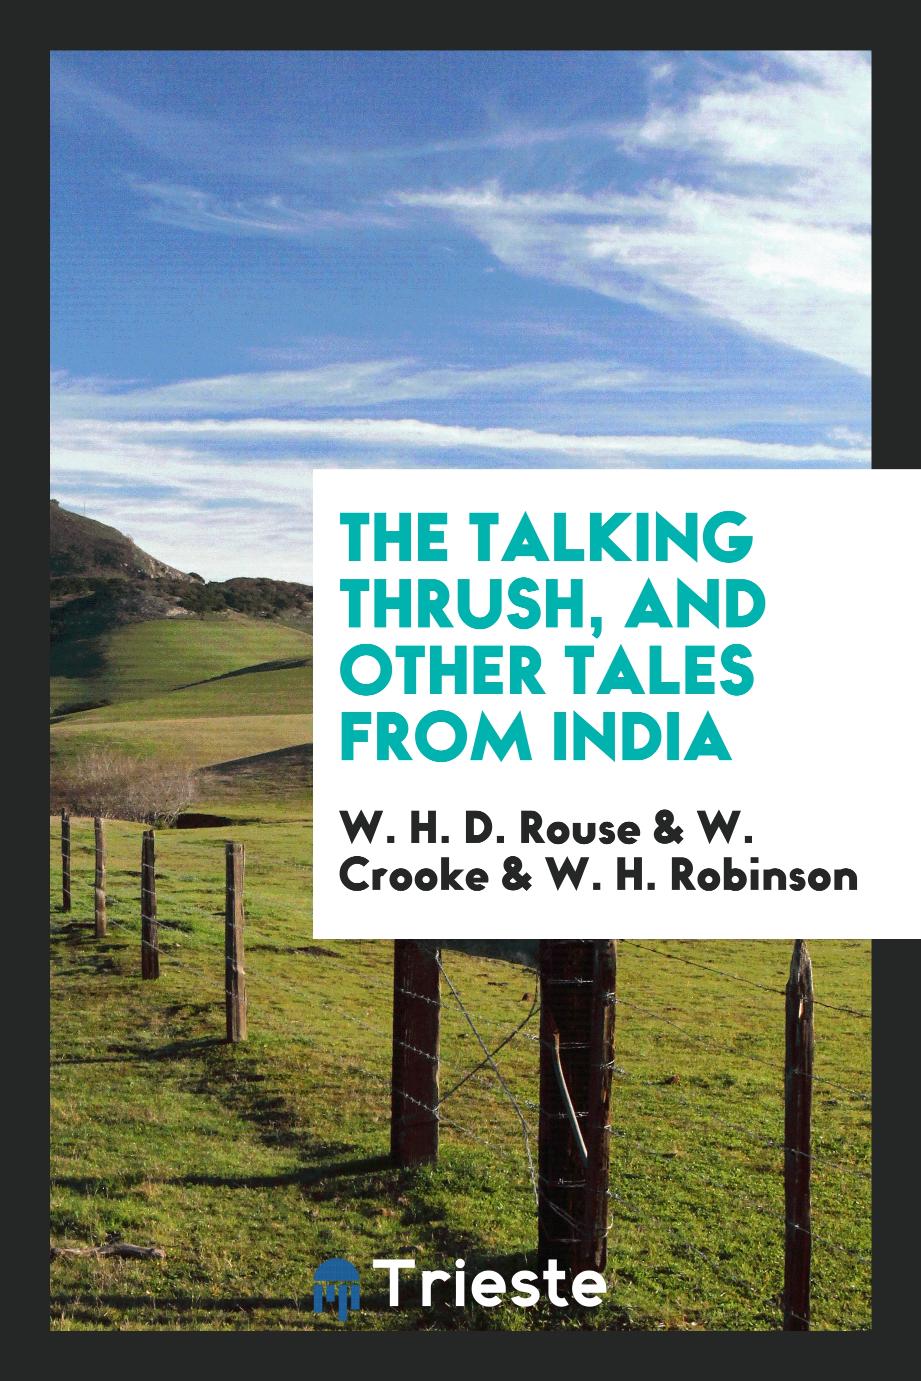 The talking thrush, and other tales from India